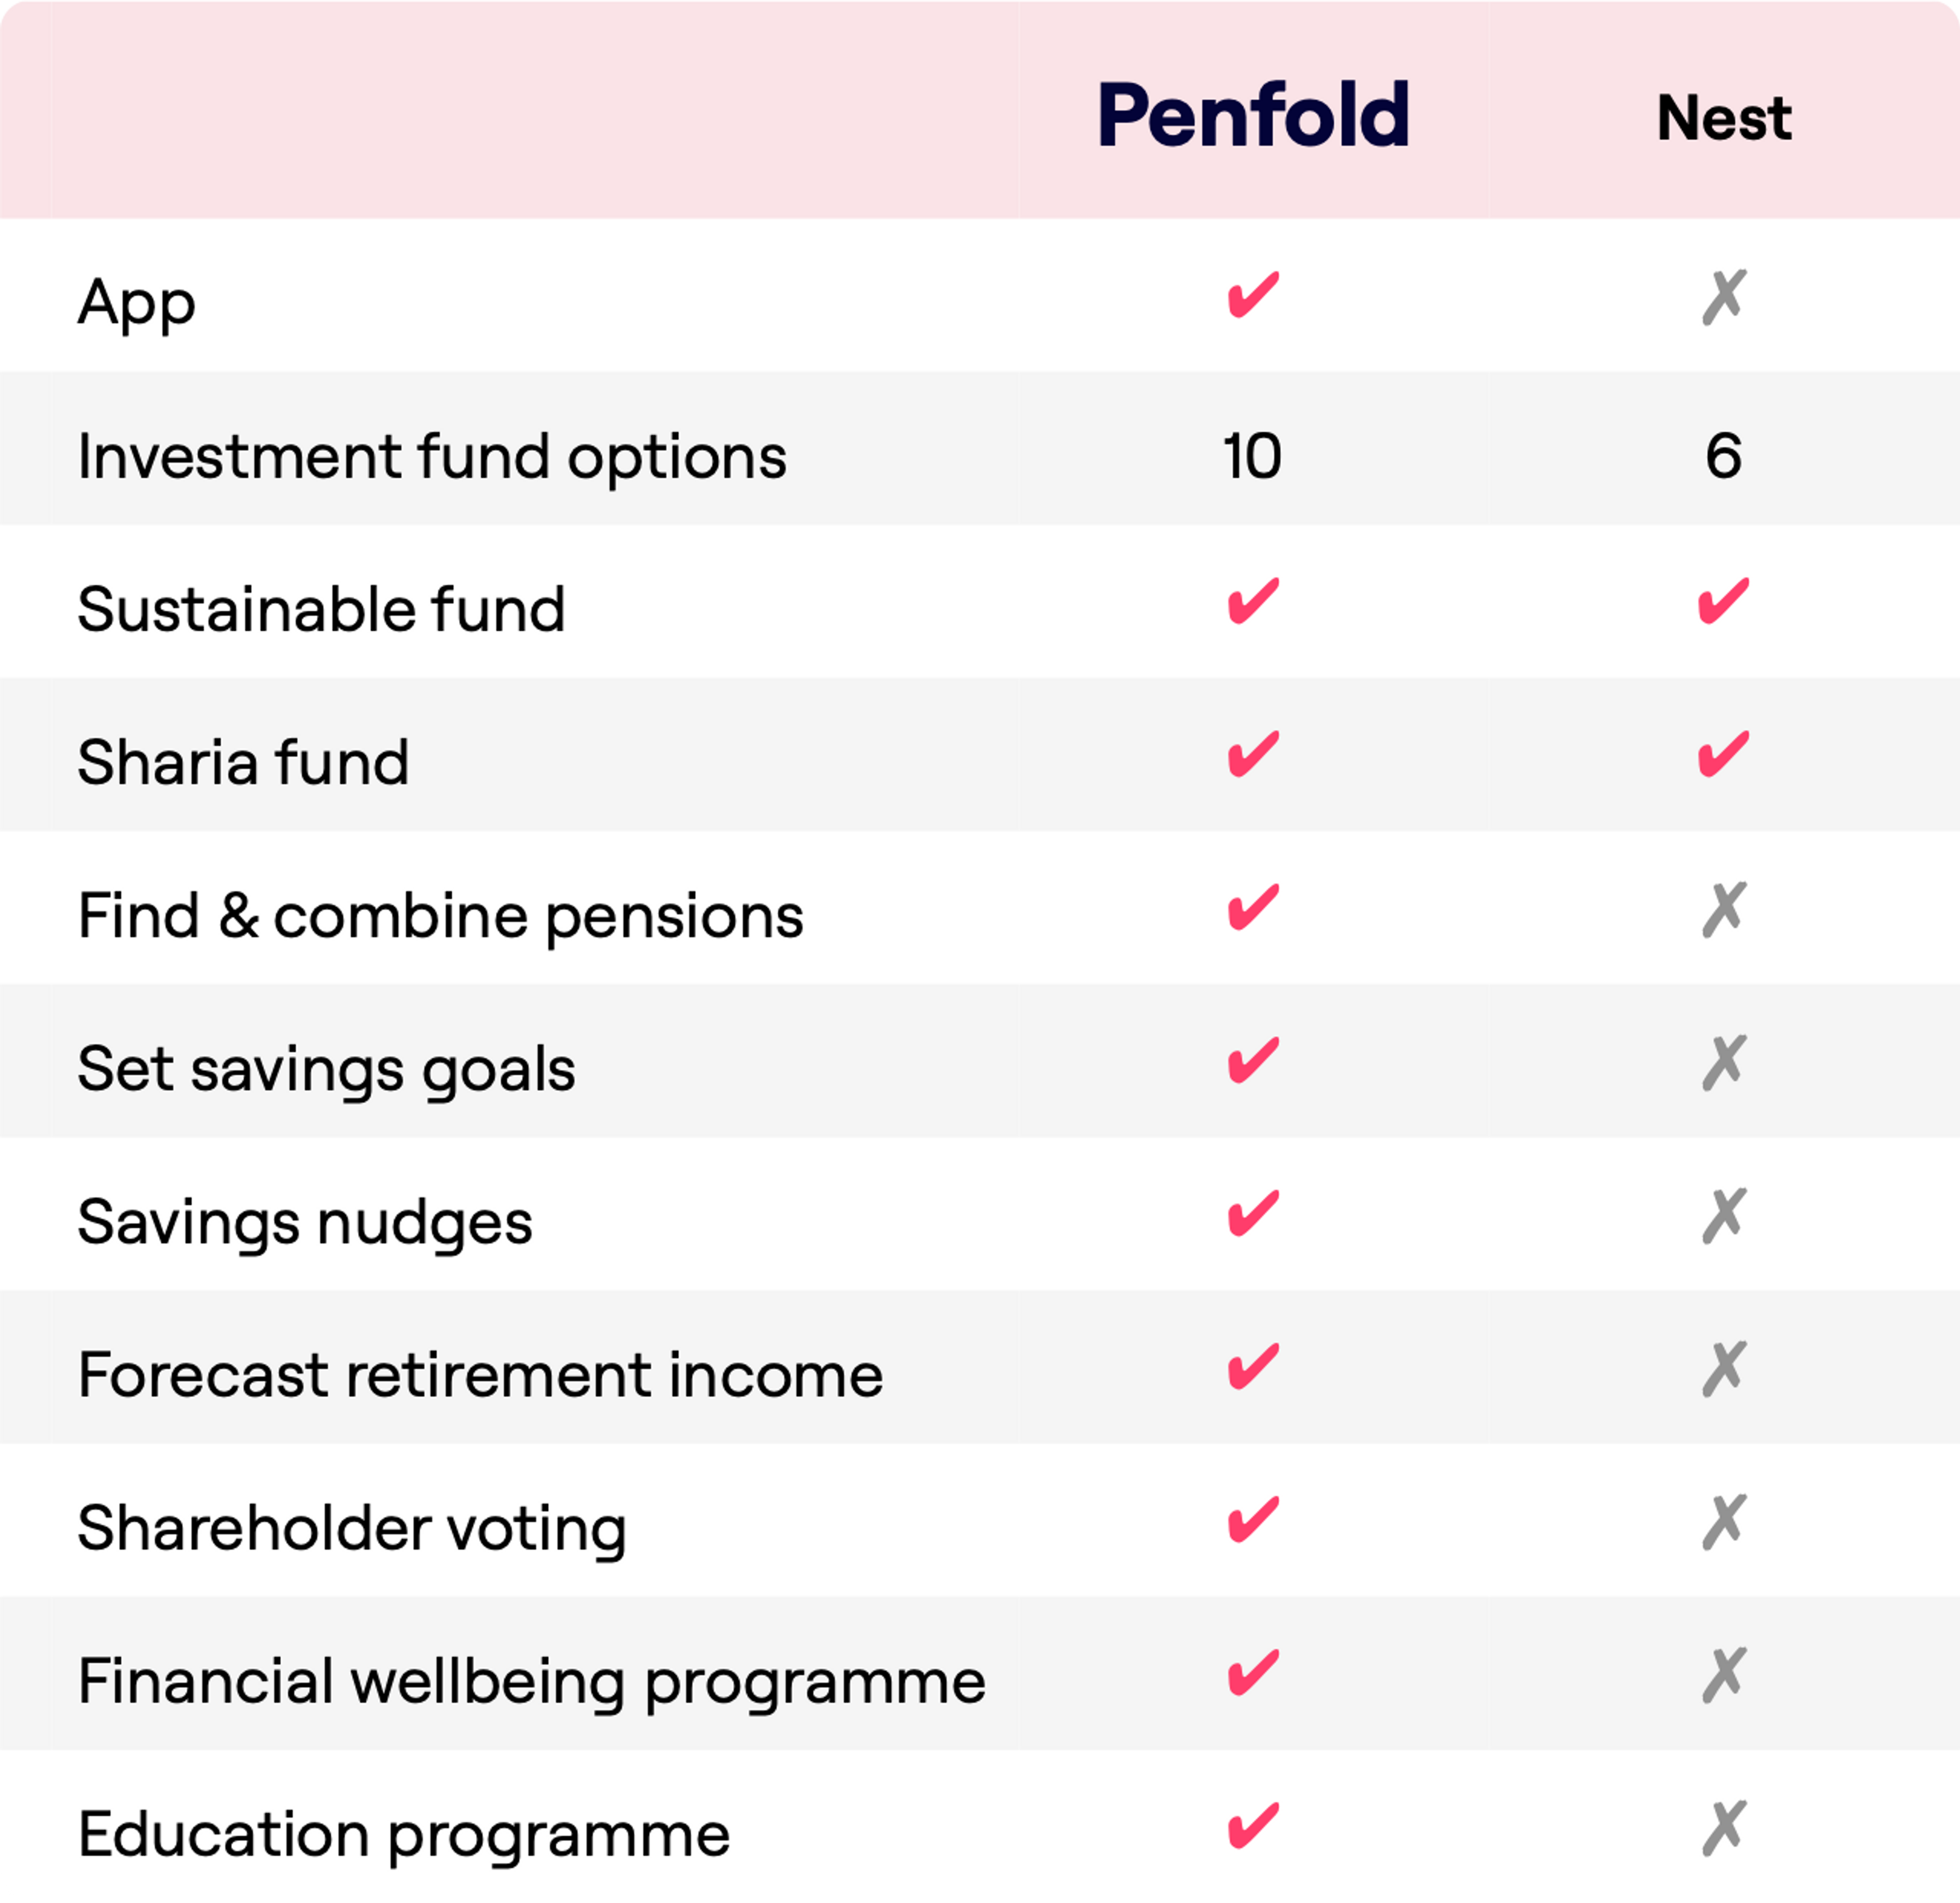 A feature comparison chart for Penfold and Nest pension services. Penfold offers an app, 10 investment fund options, sustainable and Sharia funds, pension finding and combining, savings goals setting, savings nudges, retirement income forecasting, shareholder voting, a financial wellbeing programme, and an education programme. Nest does not offer an app, has 6 investment fund options, but does provide sustainable and Sharia funds. It does not support finding and combining pensions, setting savings goals, savings nudges, retirement income forecasting, shareholder voting, financial wellbeing, or education programmes.